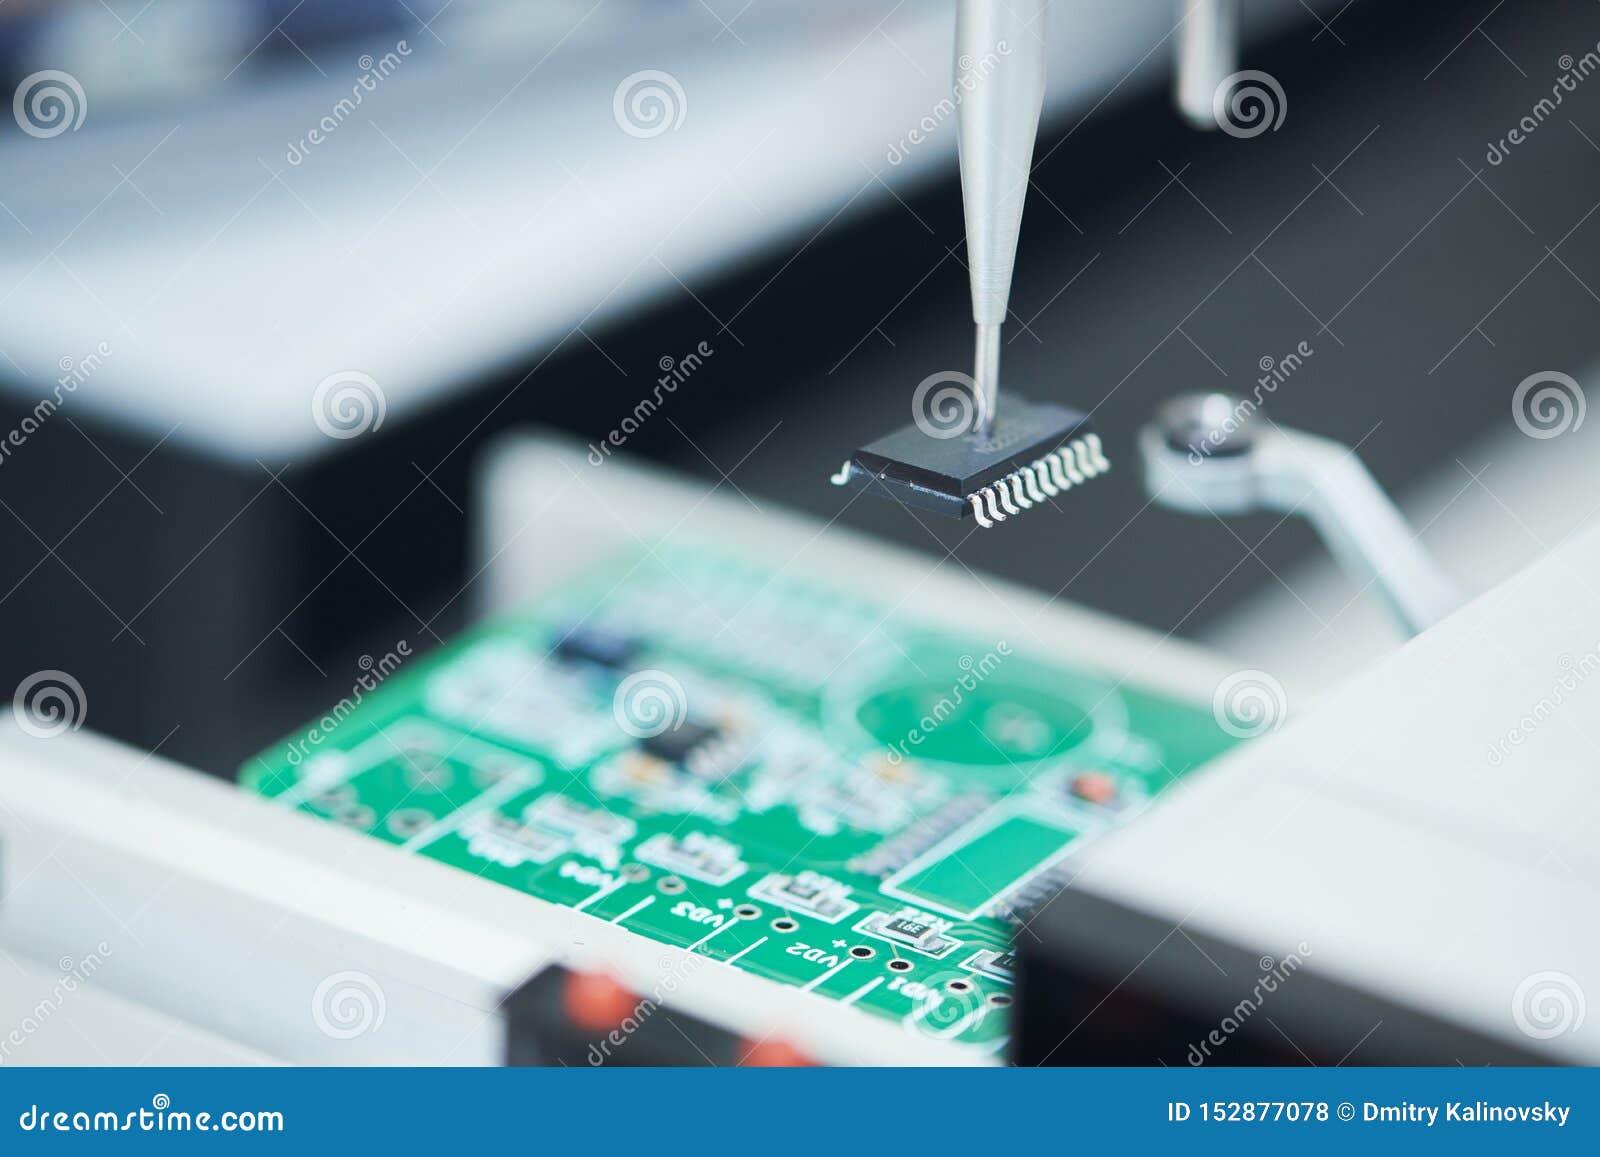 microchip semiconductor manufacturing. automatic machine robot installing chip on board.